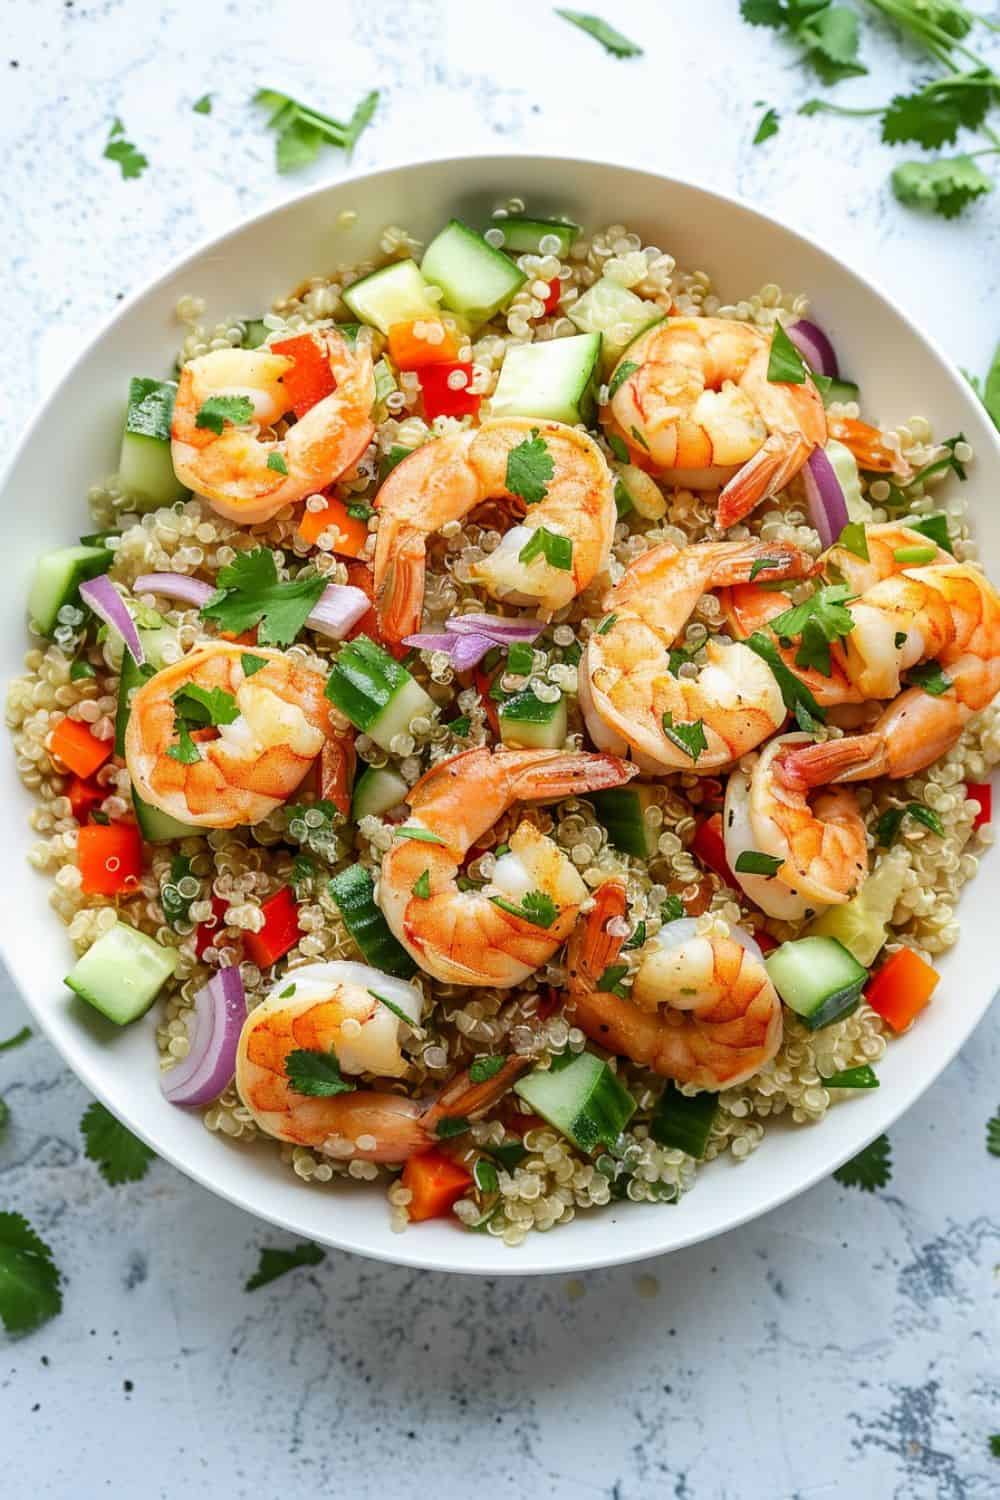 A vibrant shrimp and quinoa bowl featuring juicy shrimp, fresh vegetables, and a zesty cilantro lime dressing for a healthy, flavorful meal.